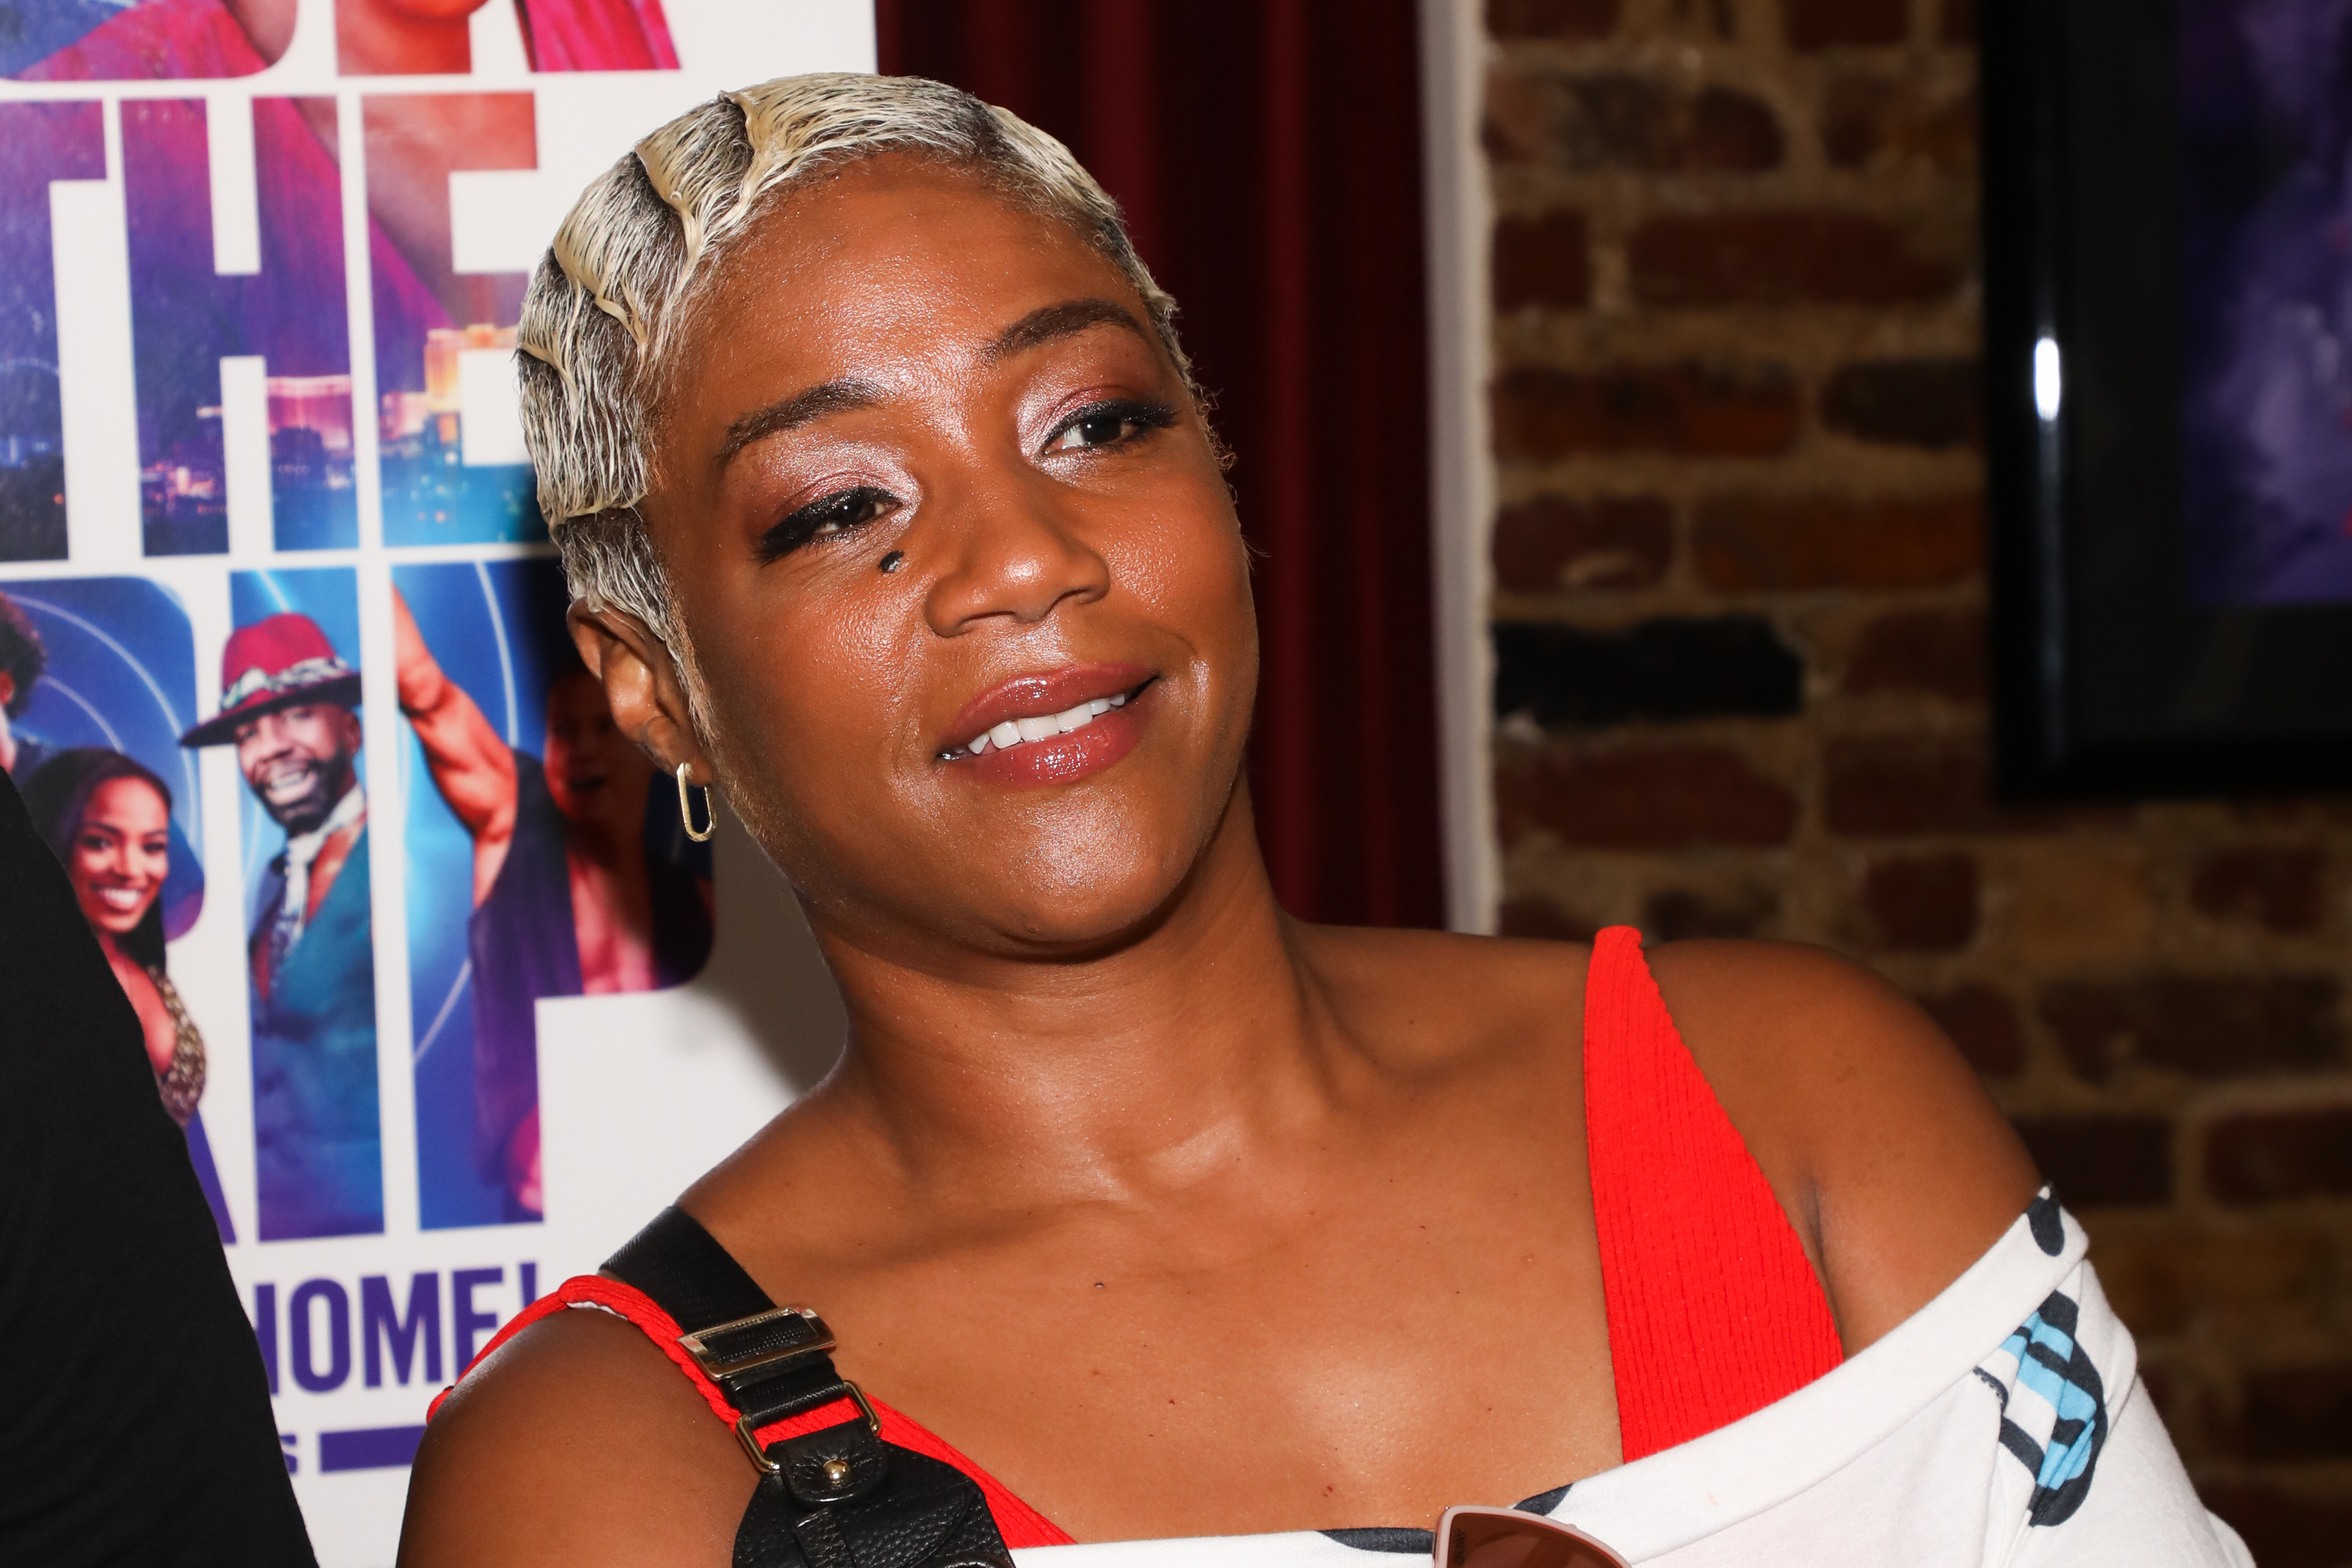 Tiffany Haddish poses in a white dress with red straps at an event